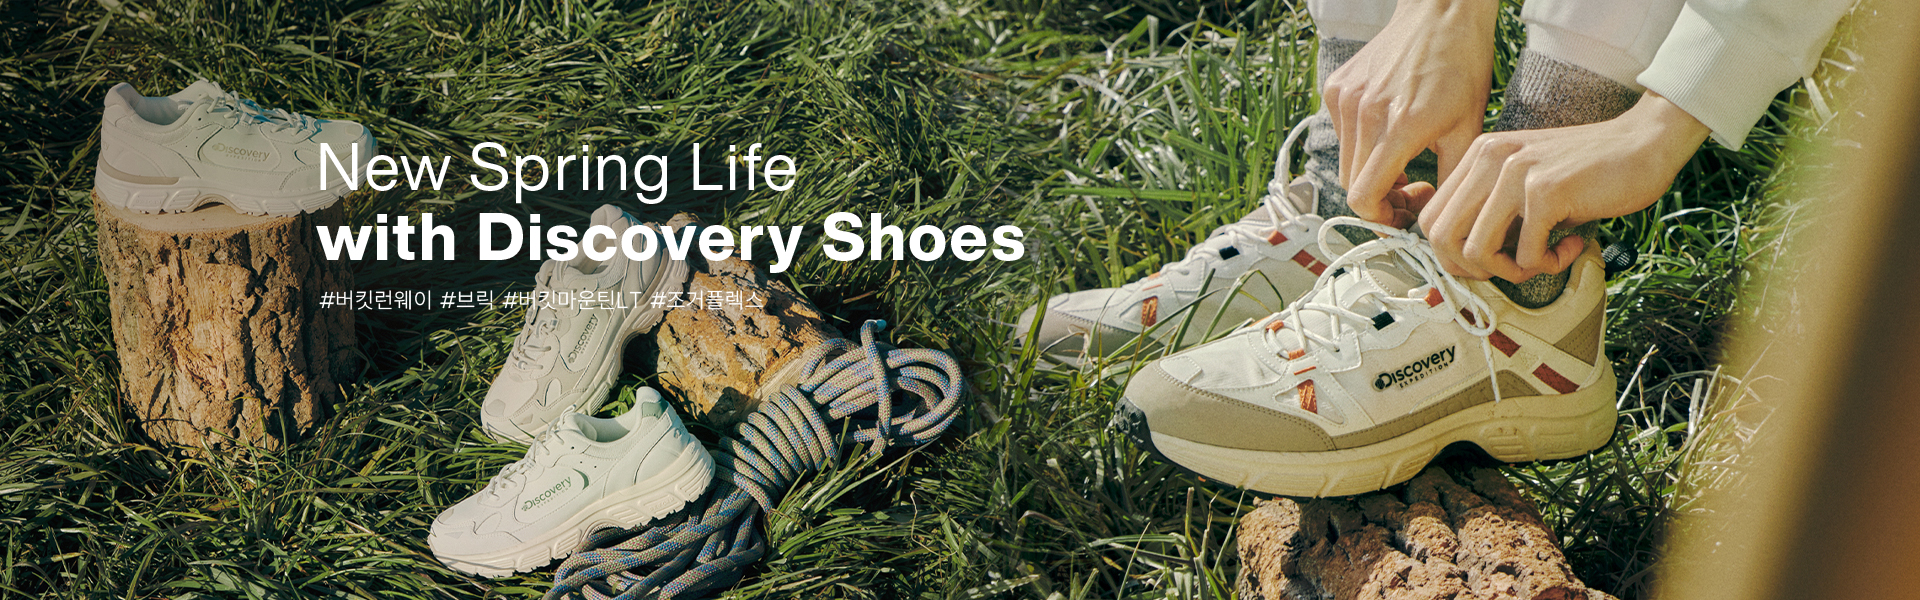 New Spring Life with Discovery Shoes